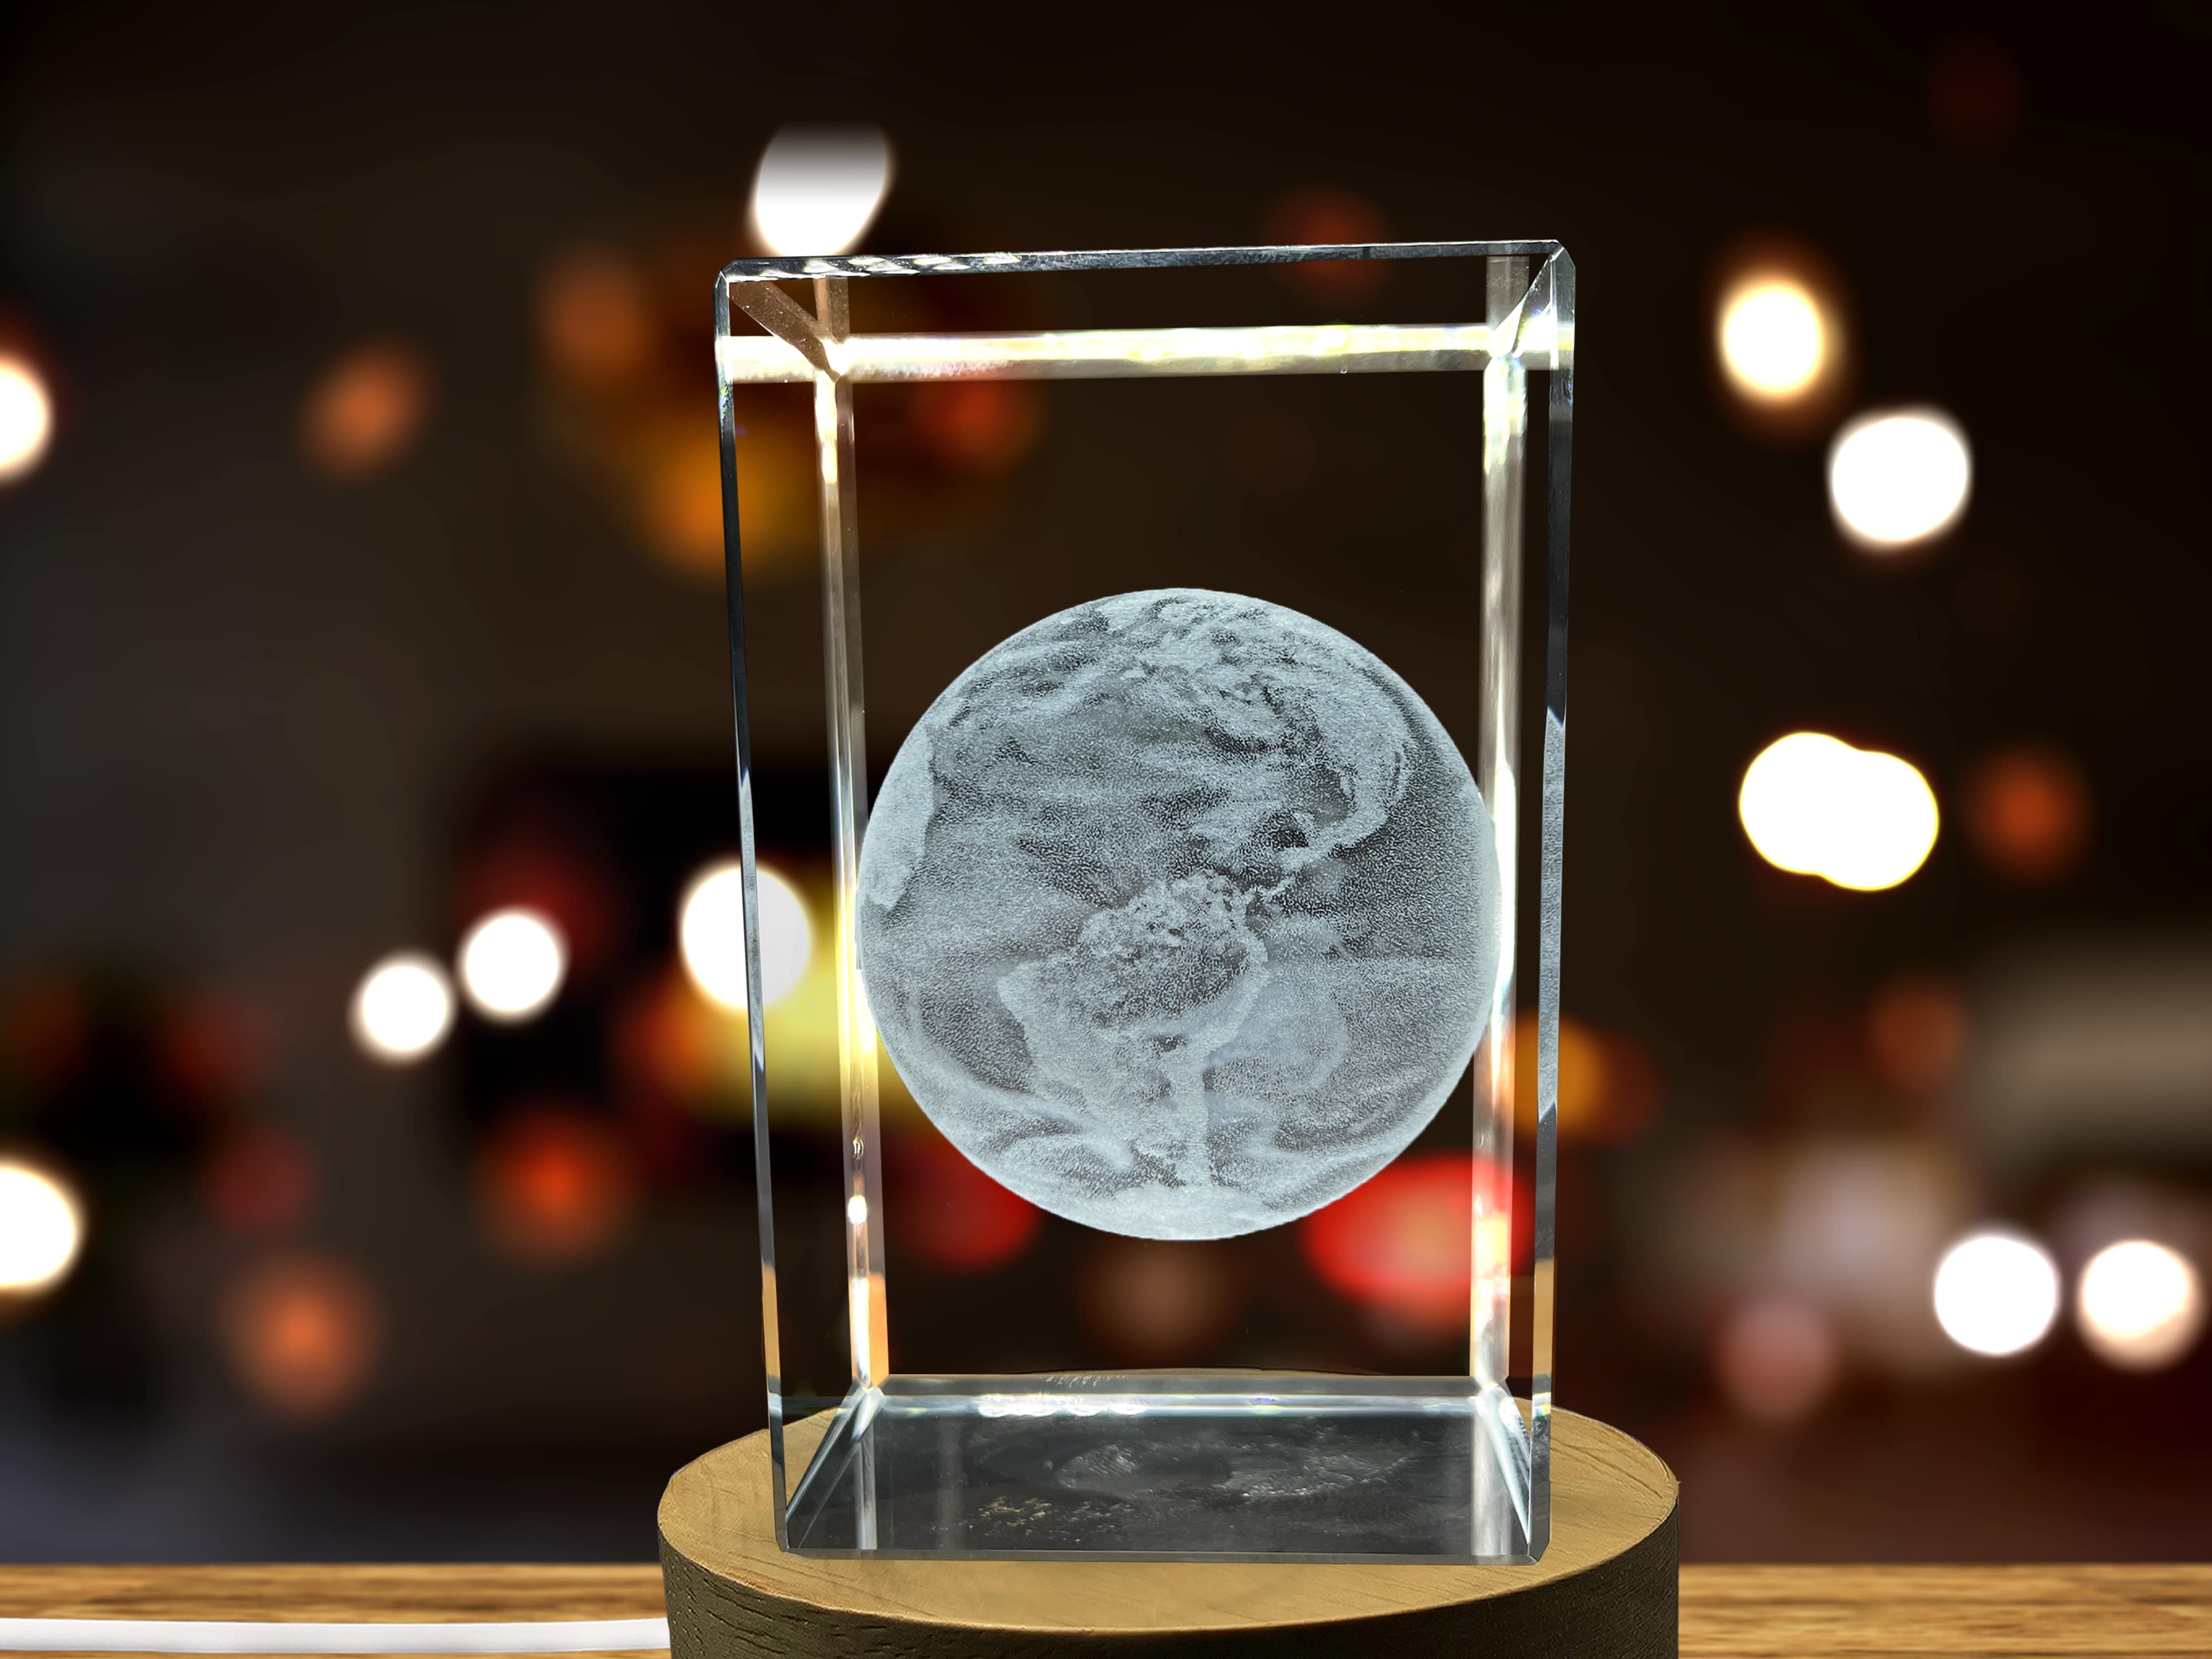 Planet Earth 3D Engraved Crystal Novelty Decor A&B Crystal Collection